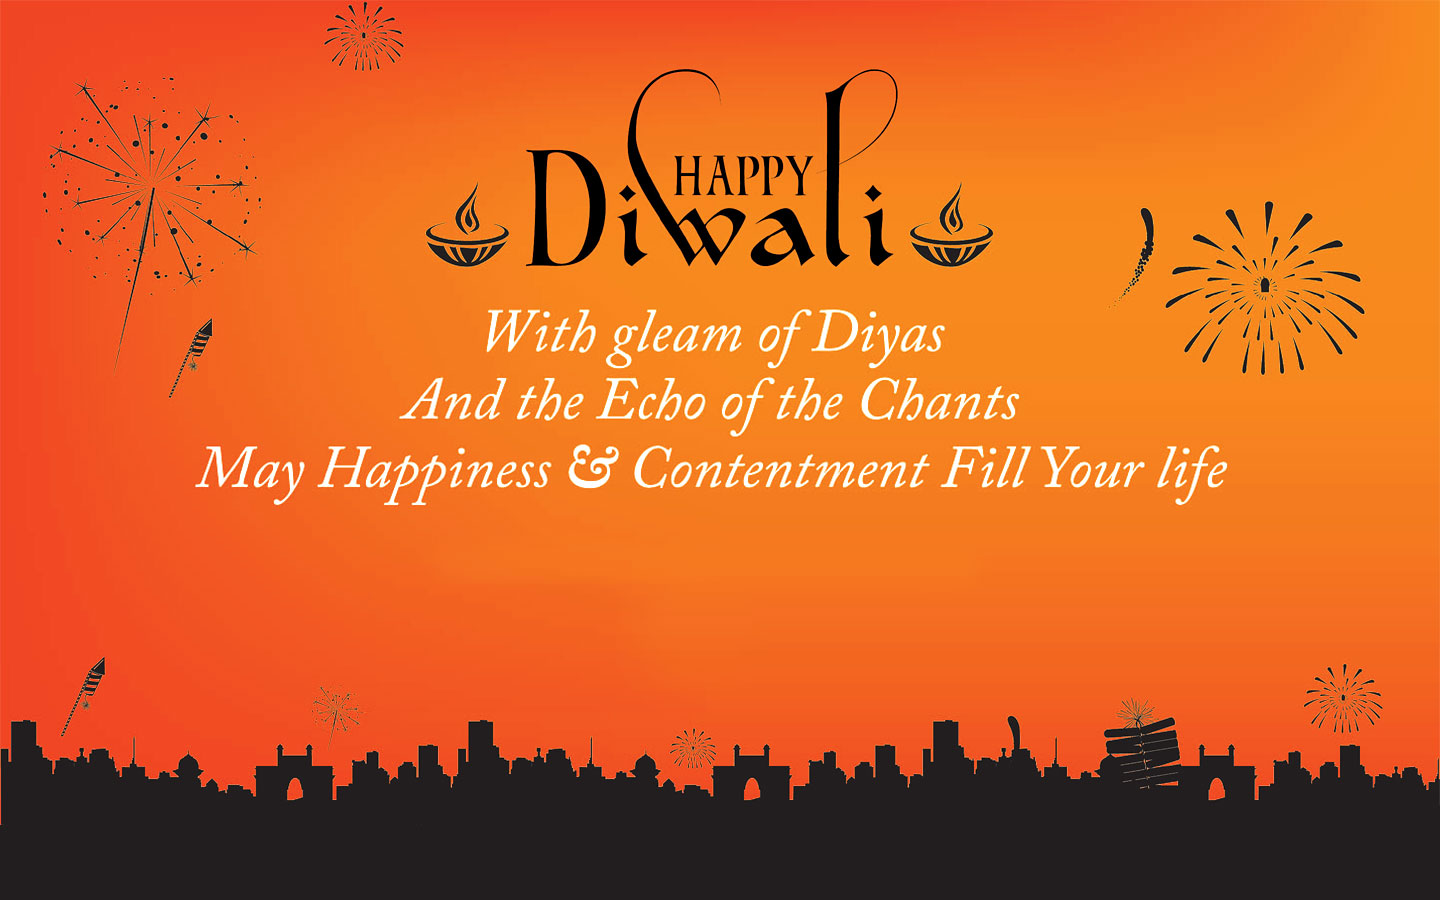 Best Diwali Wishes, Greetings & Messages For Your Friends & Family